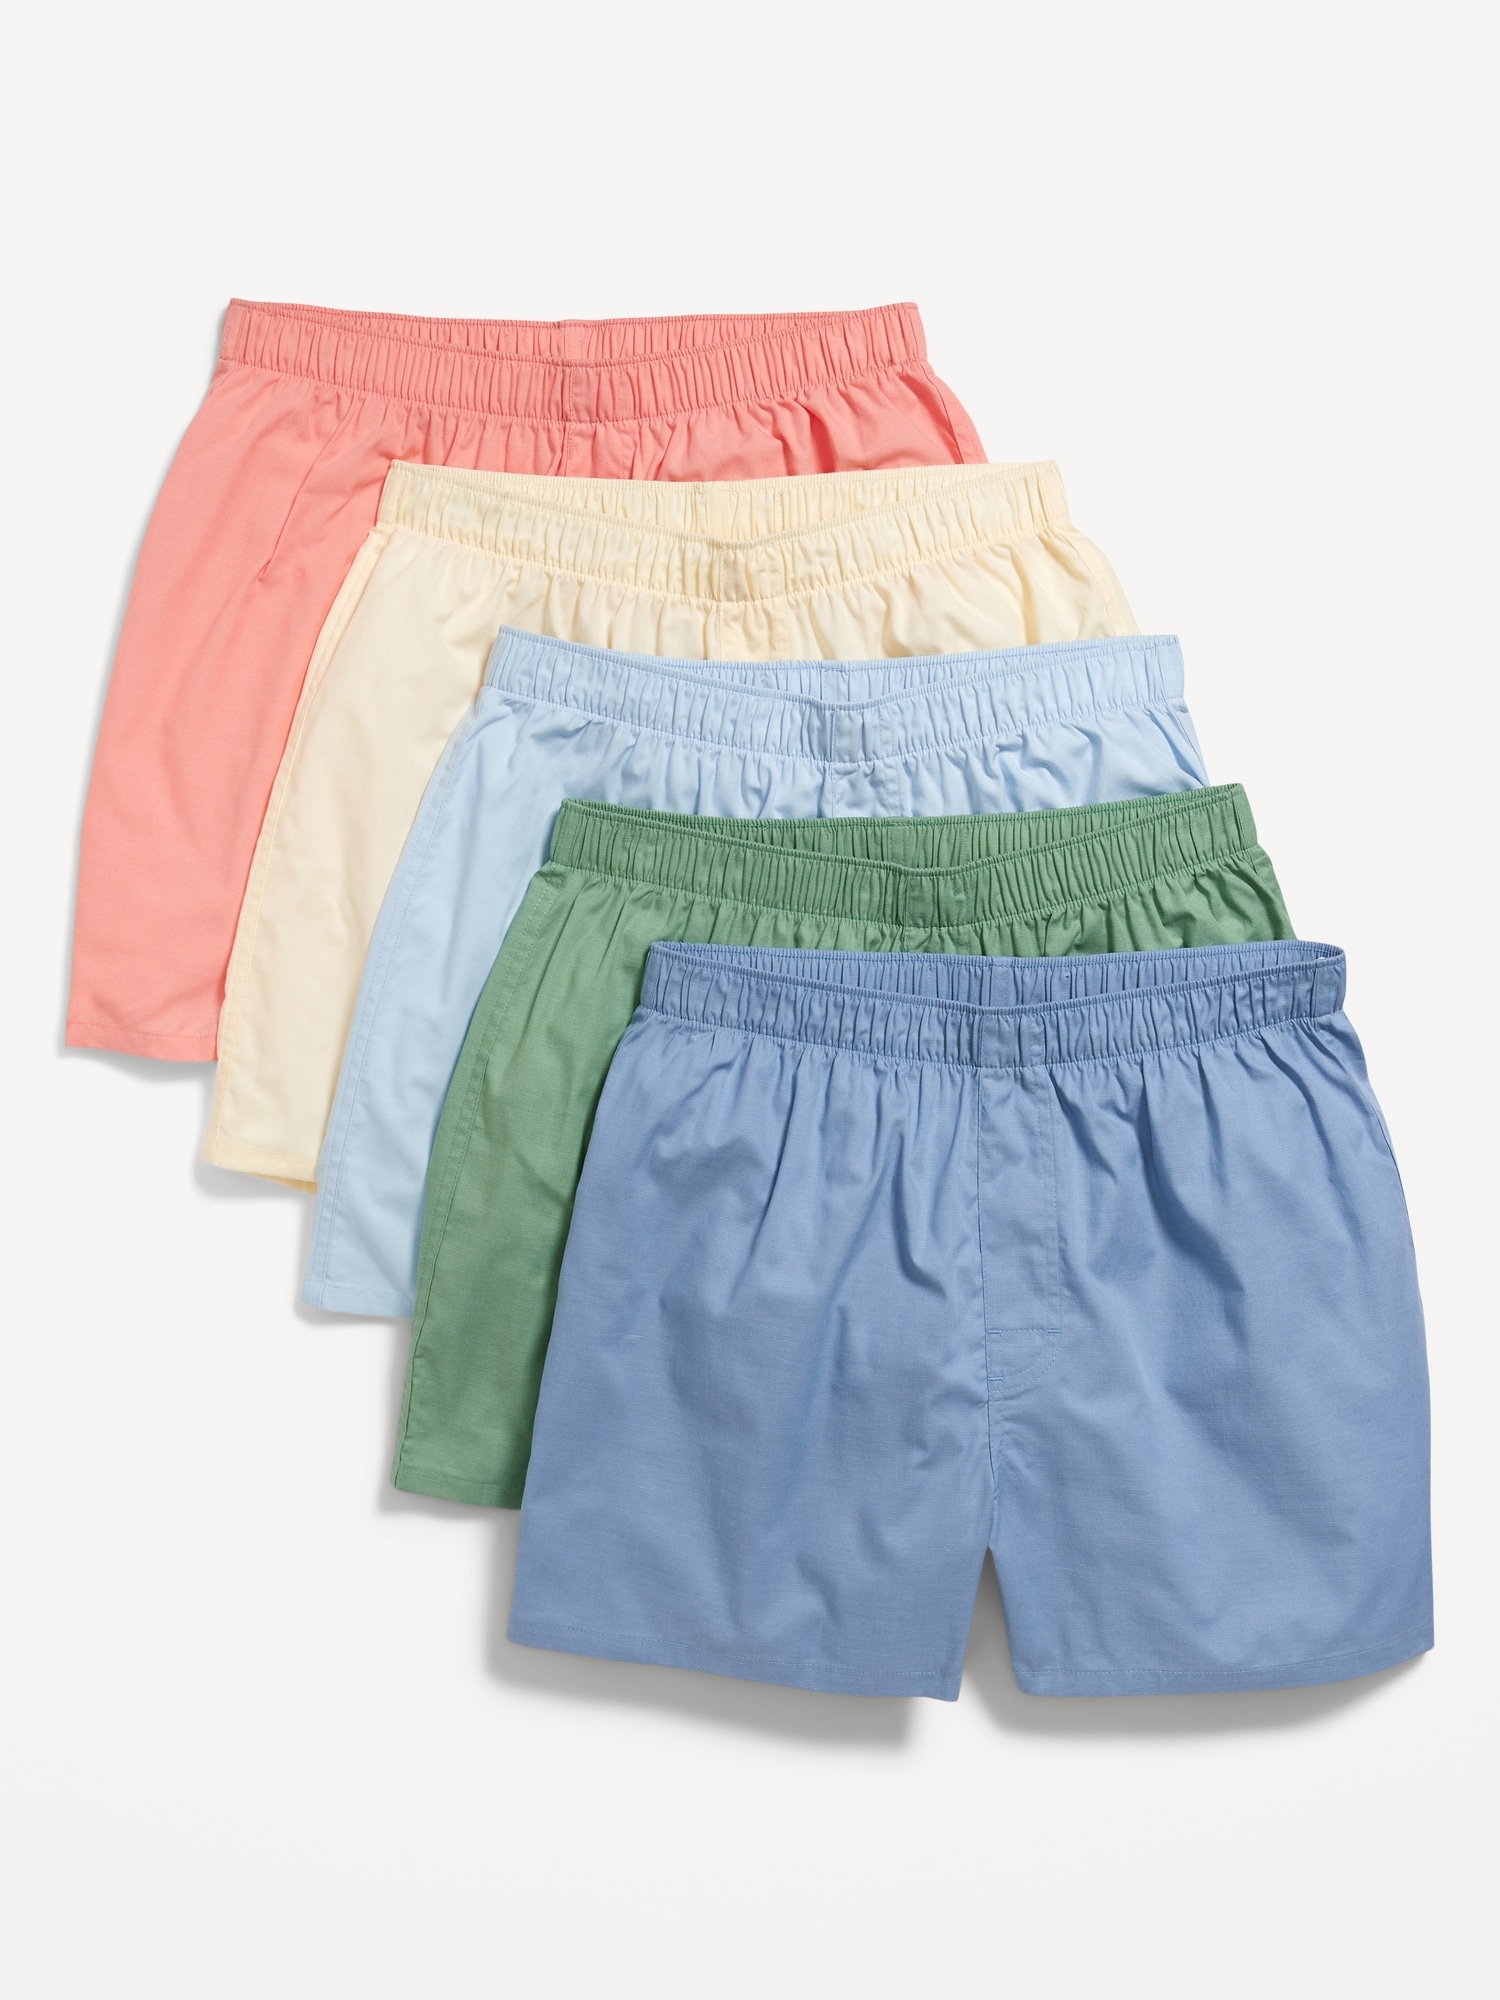 5-Pack Soft-Washed Boxer Shorts for Men -- 3.75-inch inseam